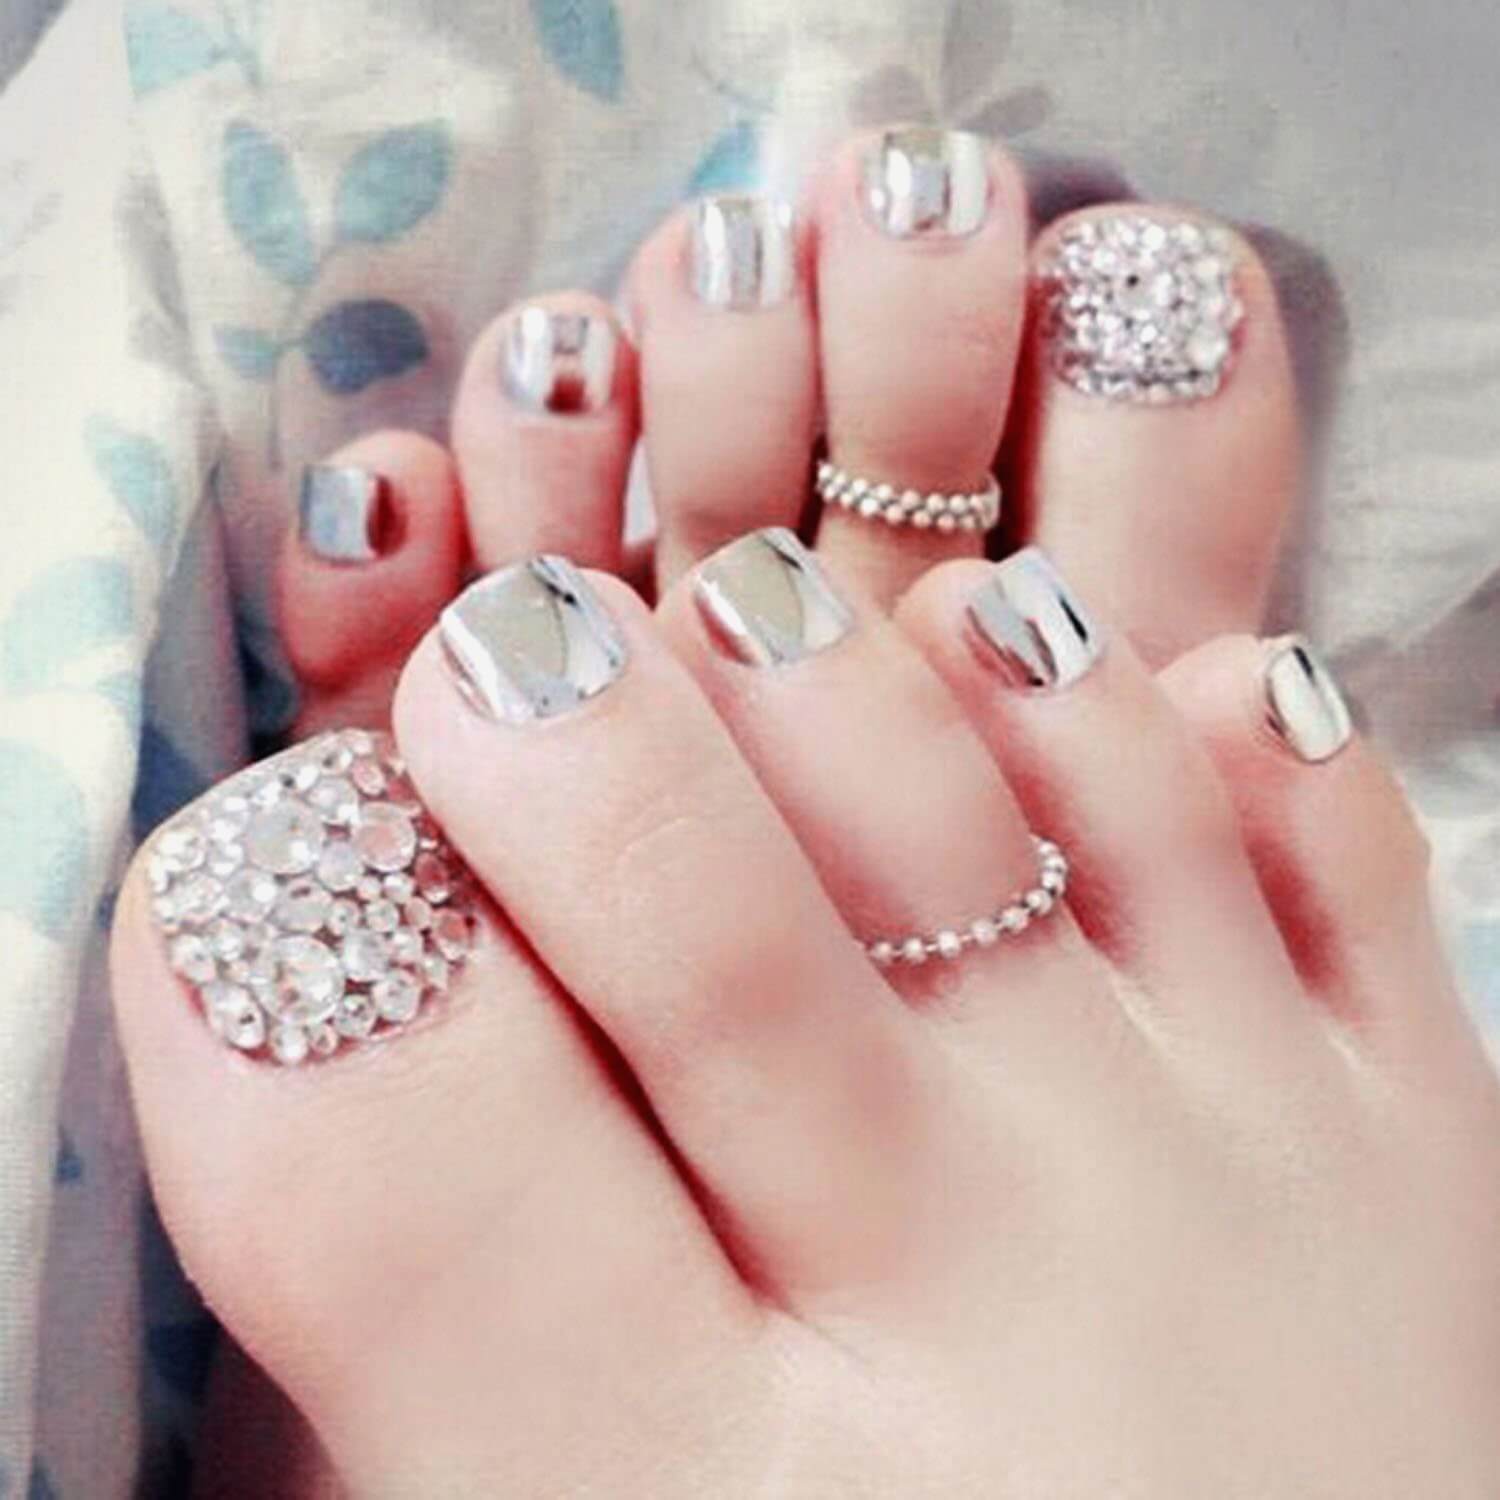 The fashion of Jewels on the Nails